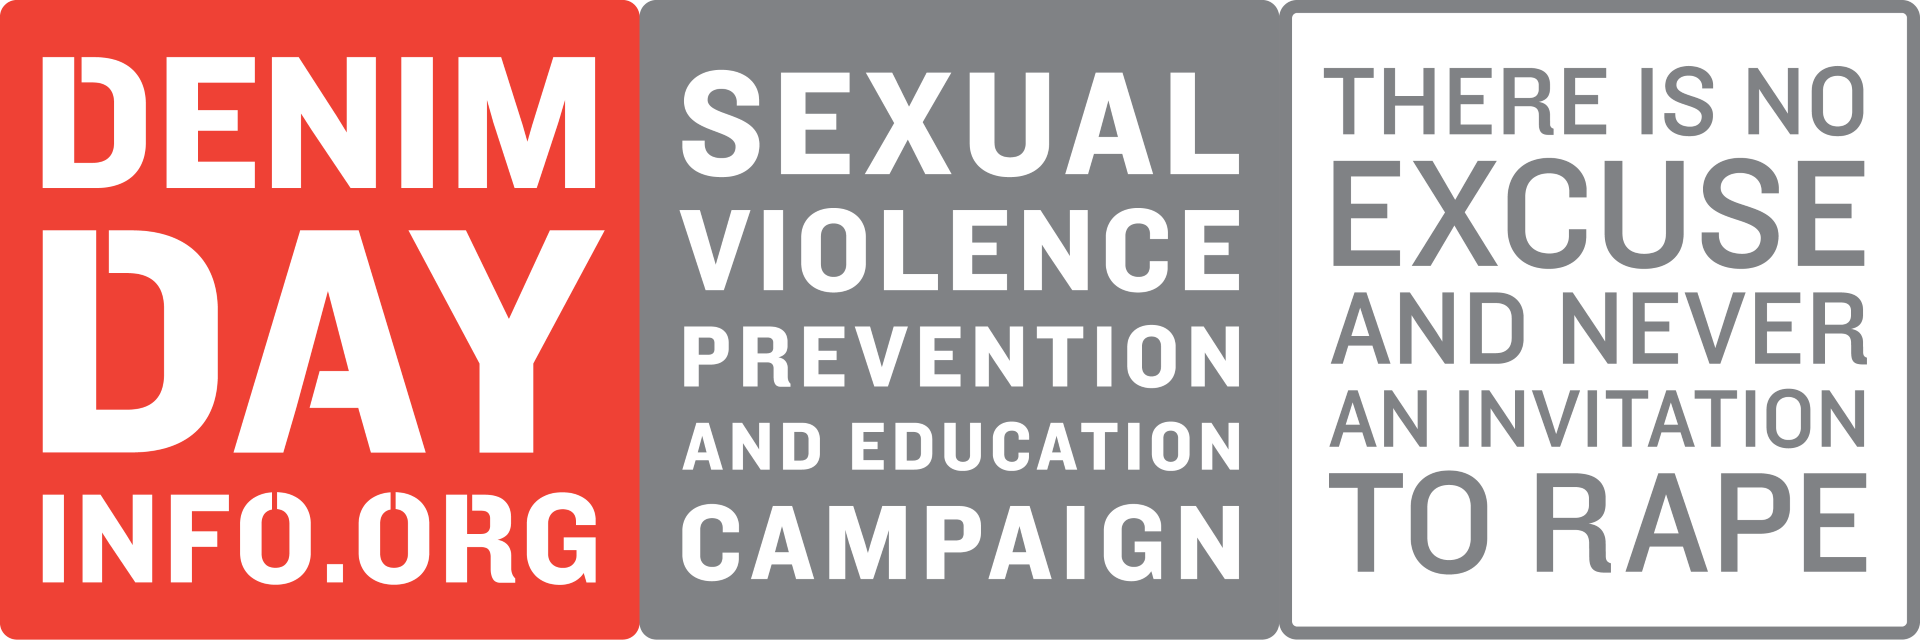 Denim Day. Sexual Violence prevention and education campaign.